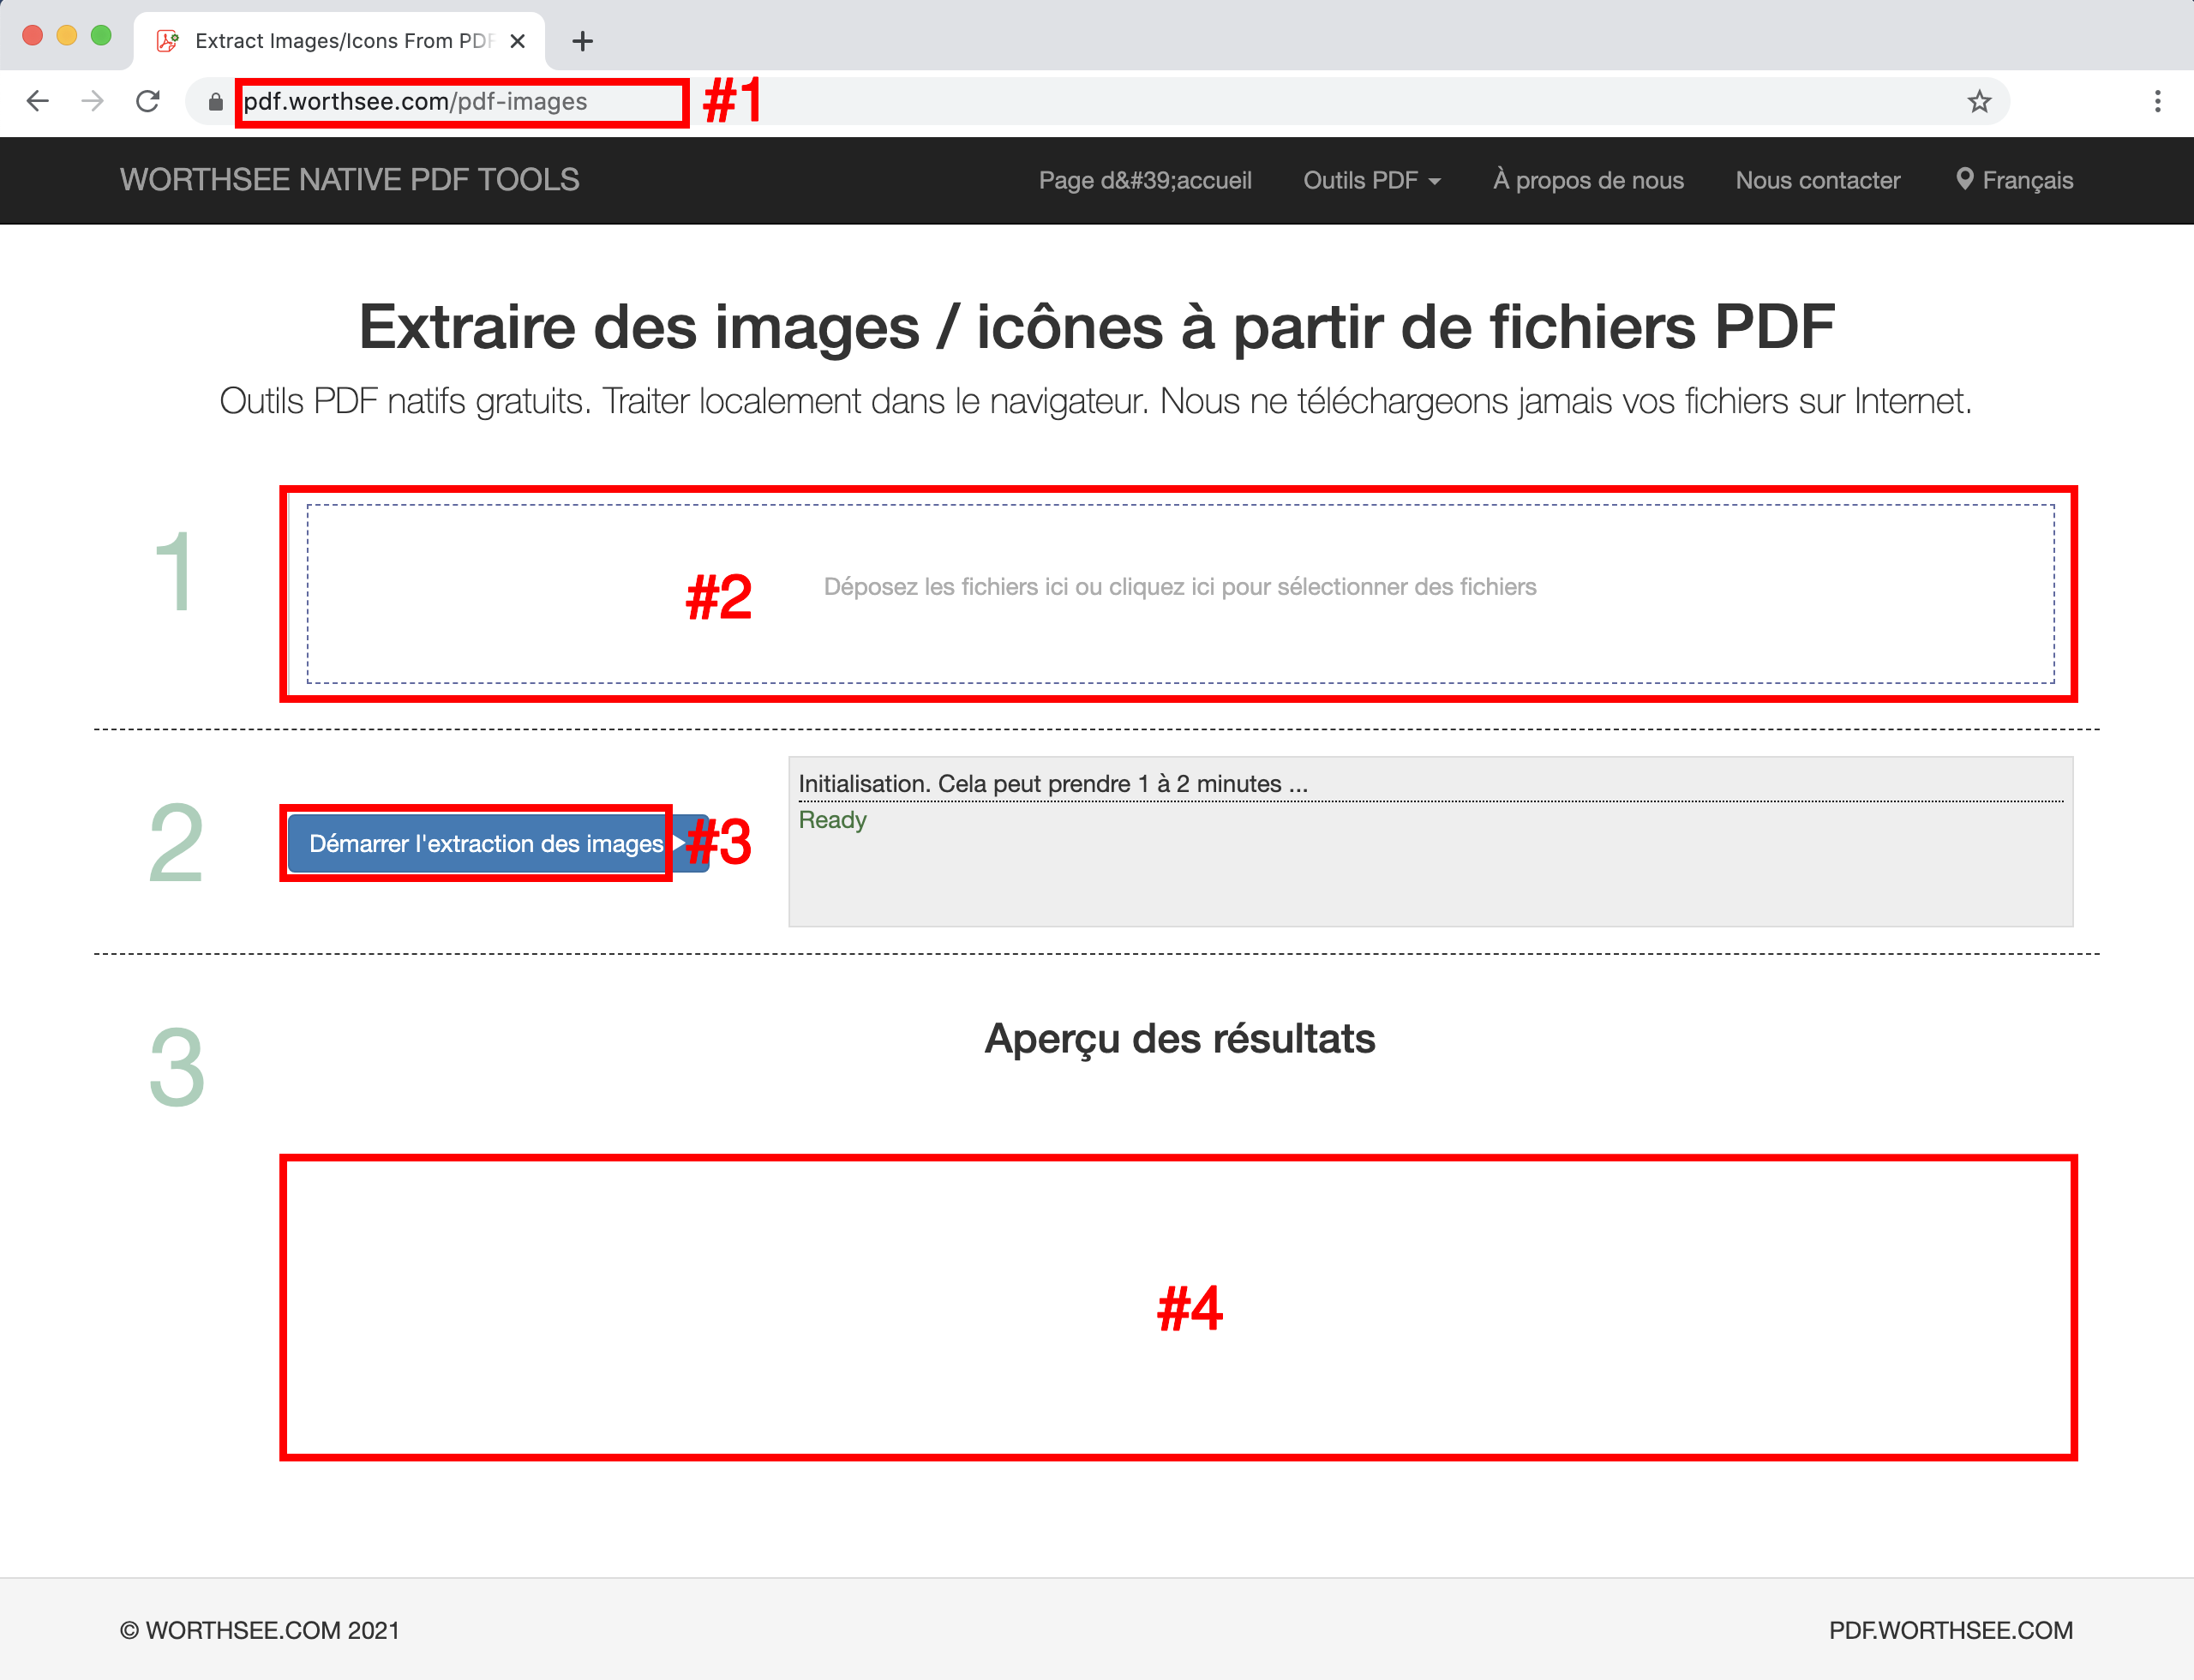 Tutorial image for extracting images from PDF files